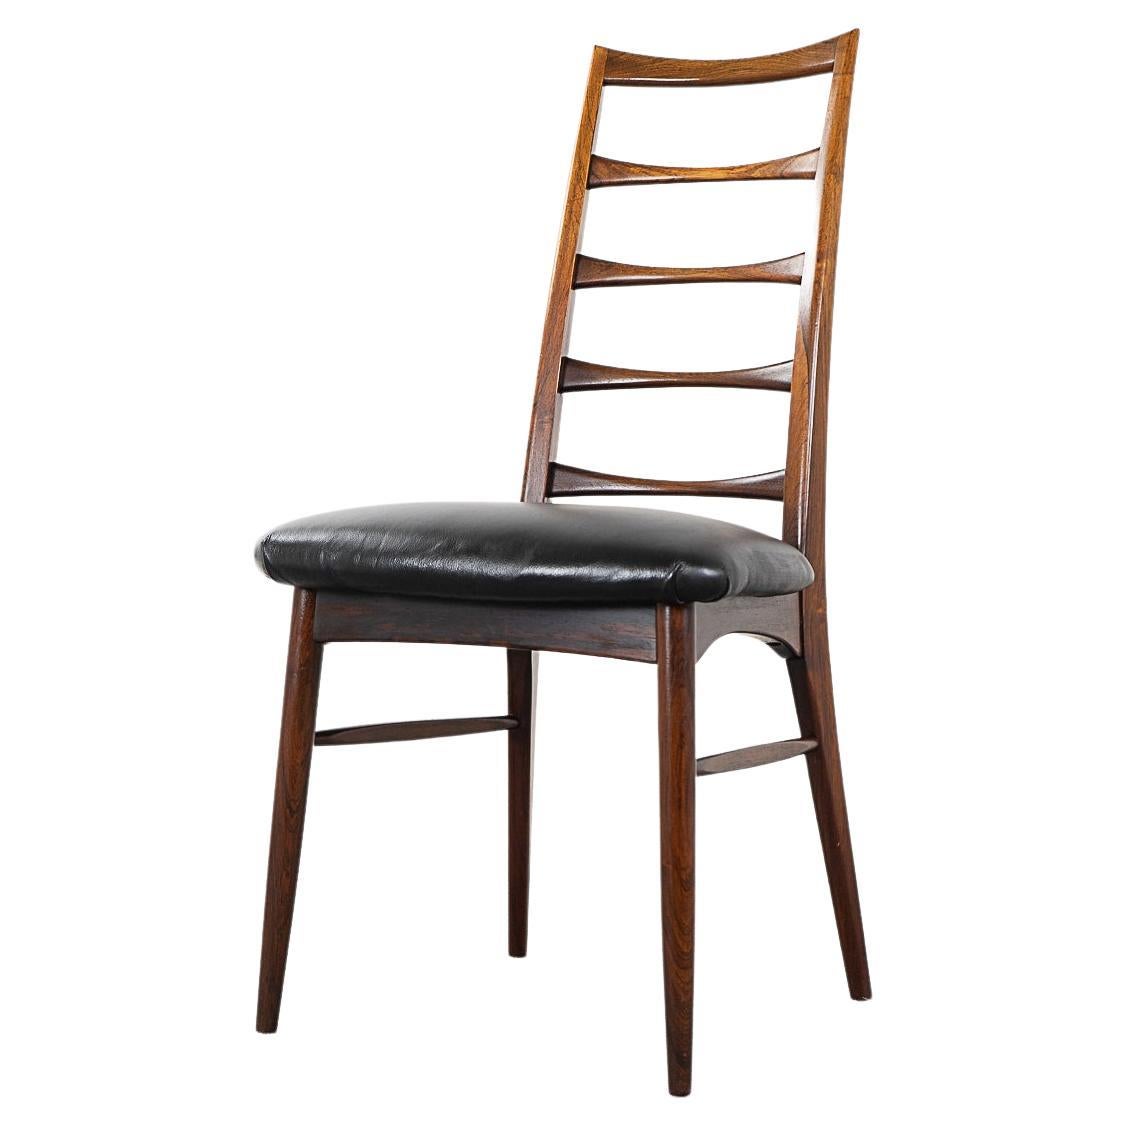 4 Rosewood "Lis" Dining Chairs by Niels Koefoed For Sale